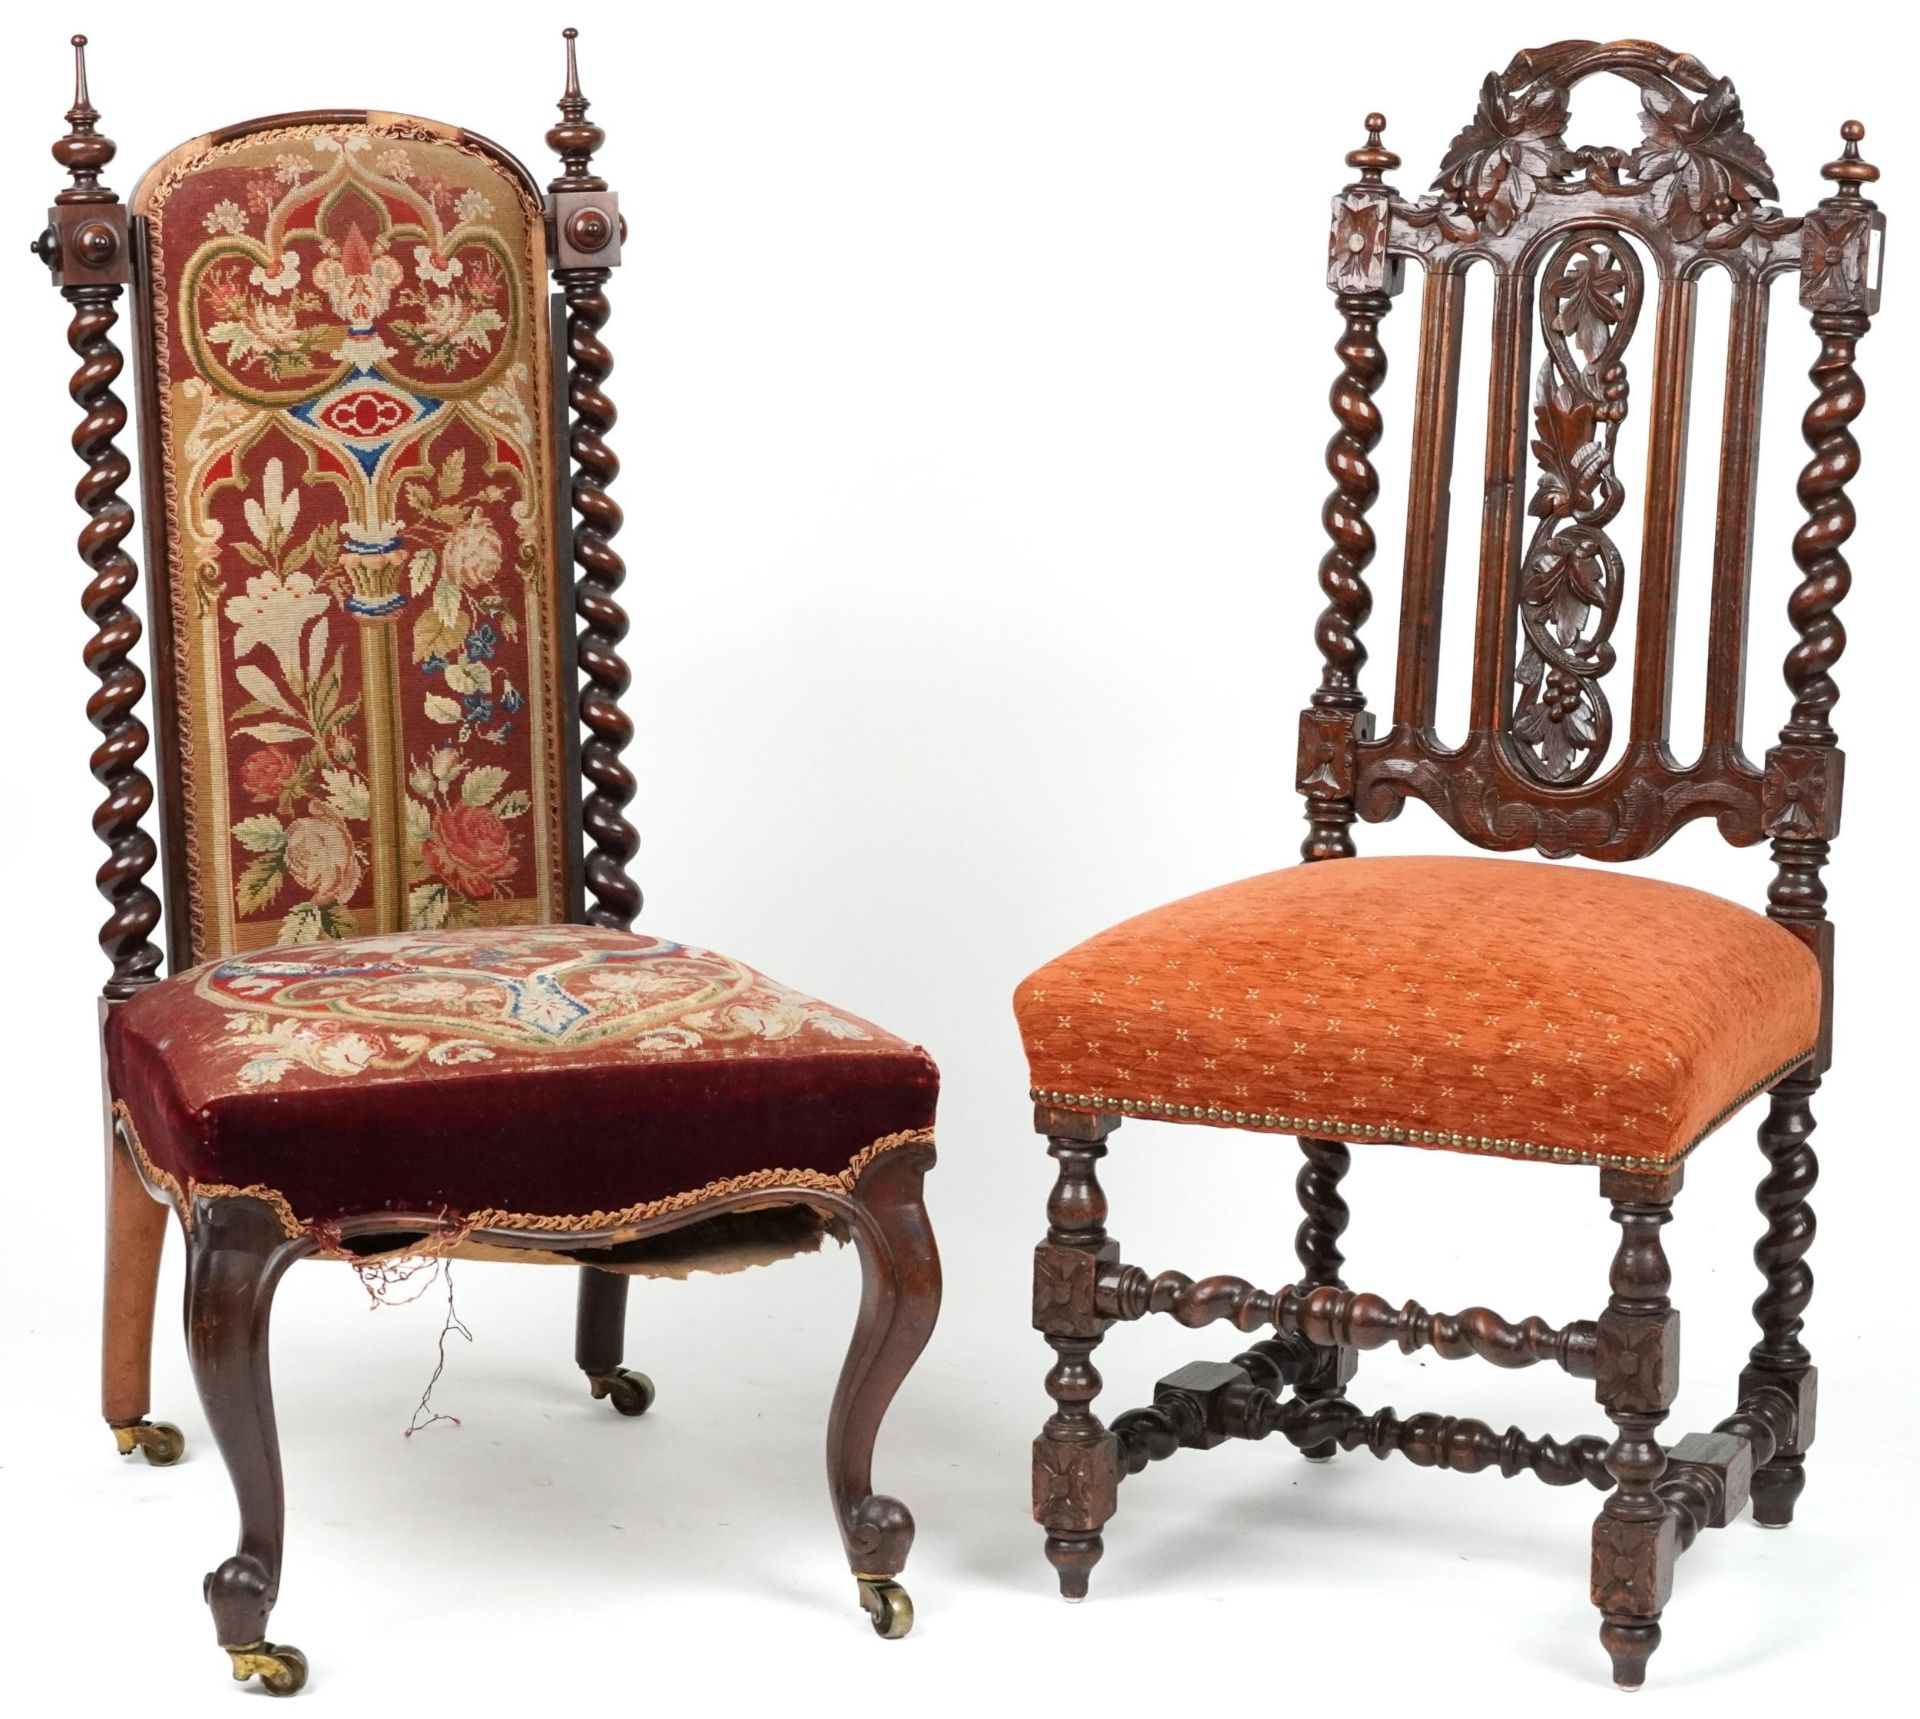 Two antique chairs including a Victorian rosewood example with tapestry back and seat, the largest